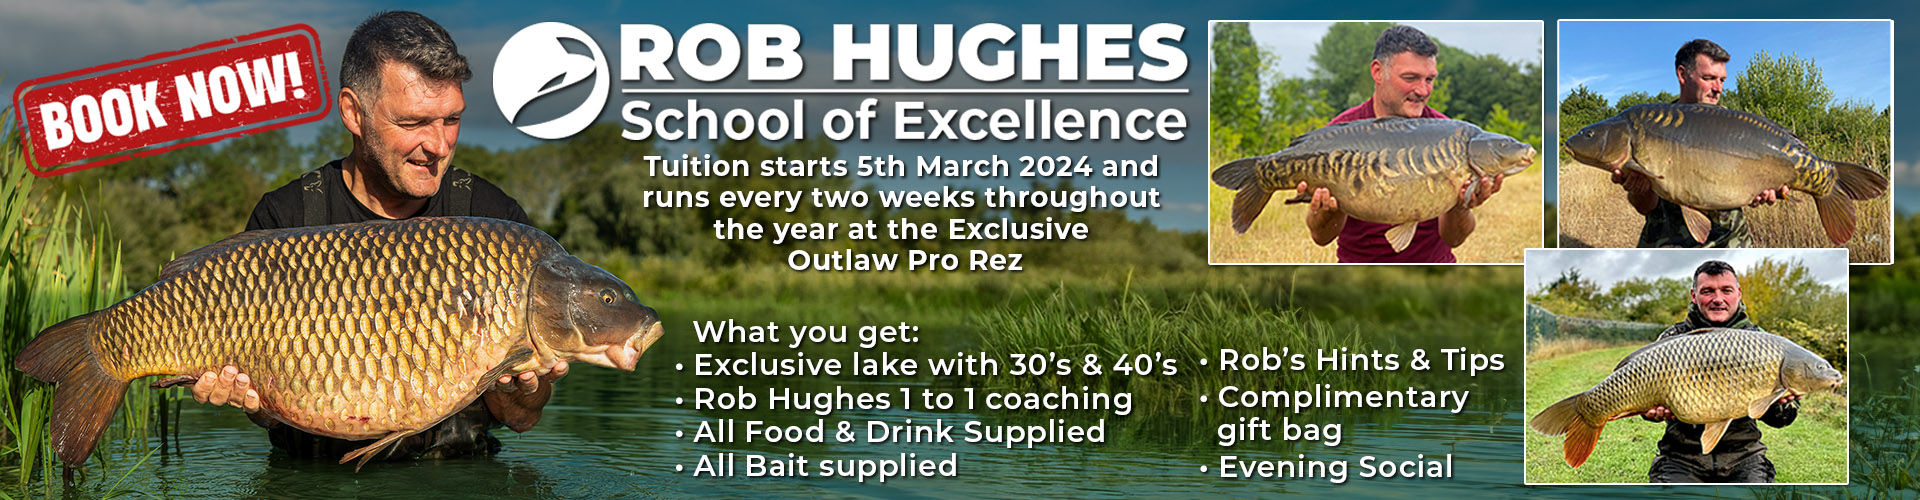 Rob Hughes Fishing School of Excellence